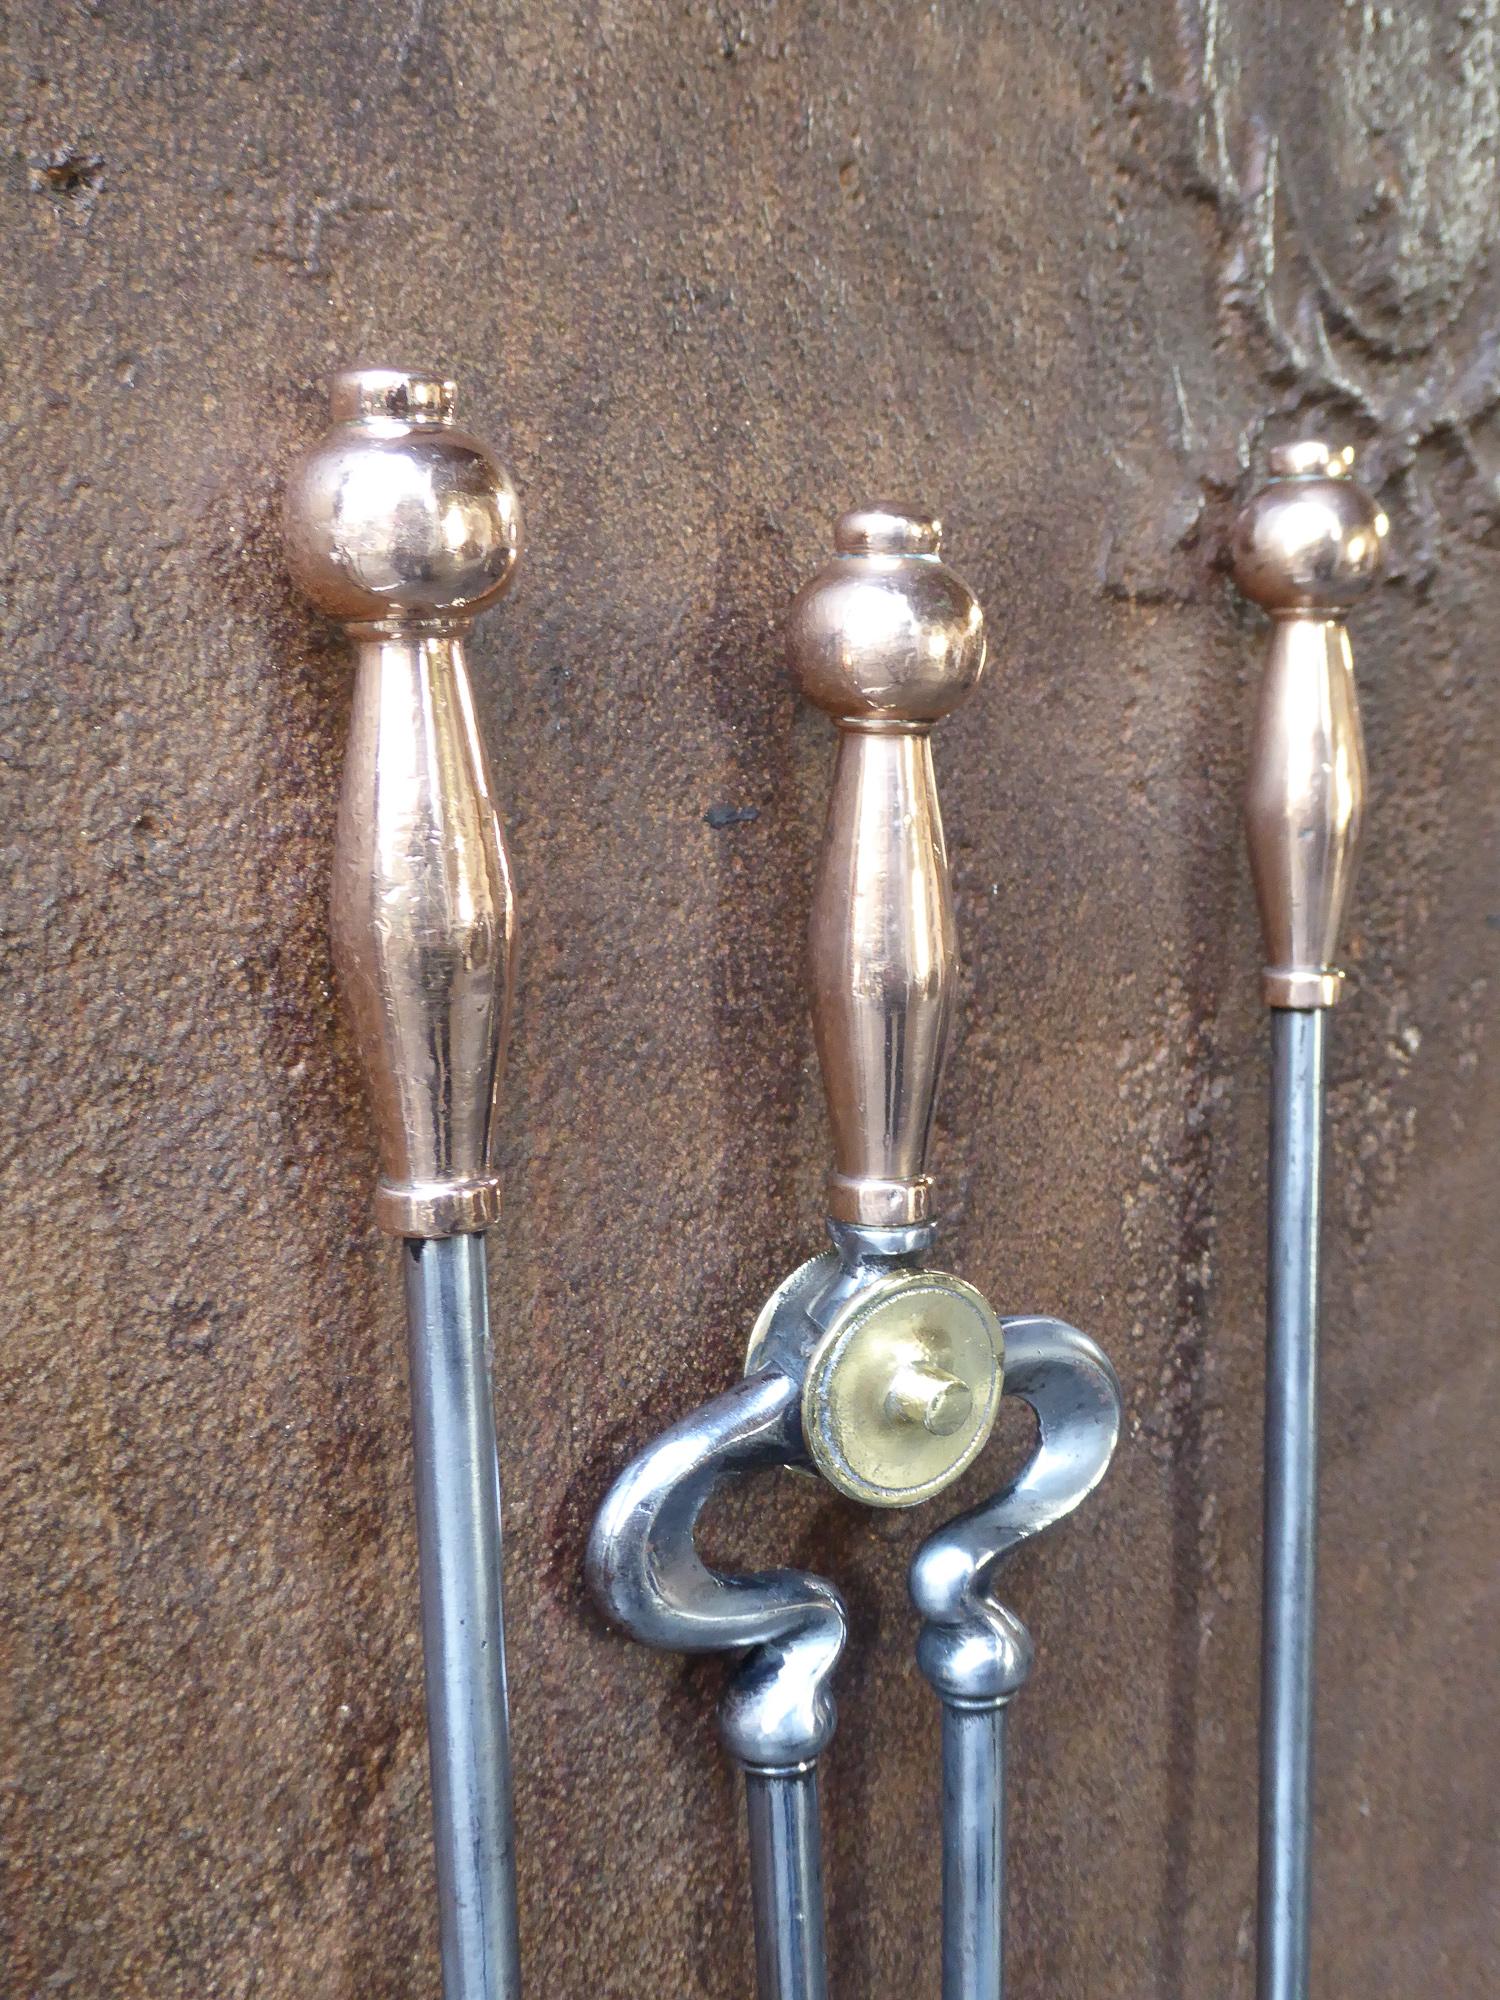 Beautiful 19th century English Victorian set of fireplace tools. The tools are made of polished copper, polished brass and polished steel. The set is in a good condition and is fully functional.

